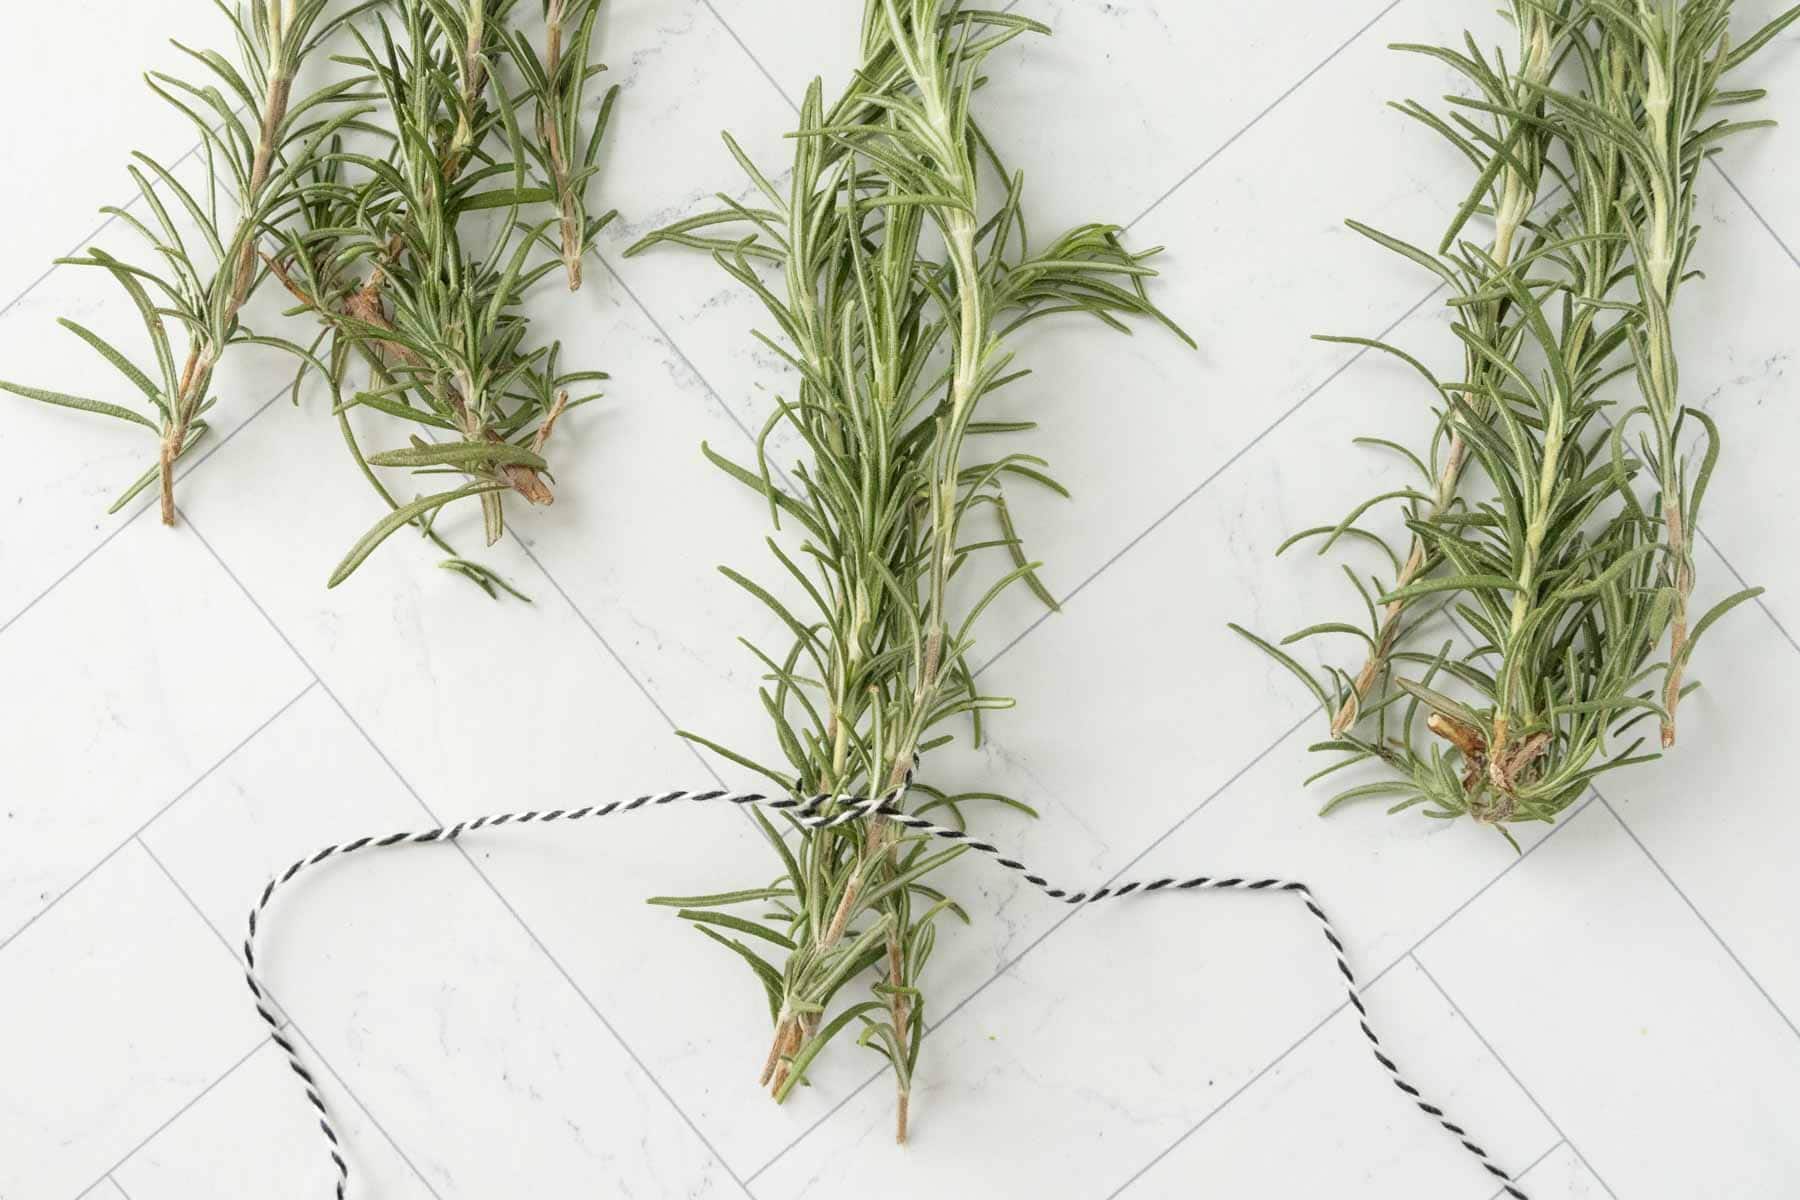 Rosemary sprigs on a white marble countertop.